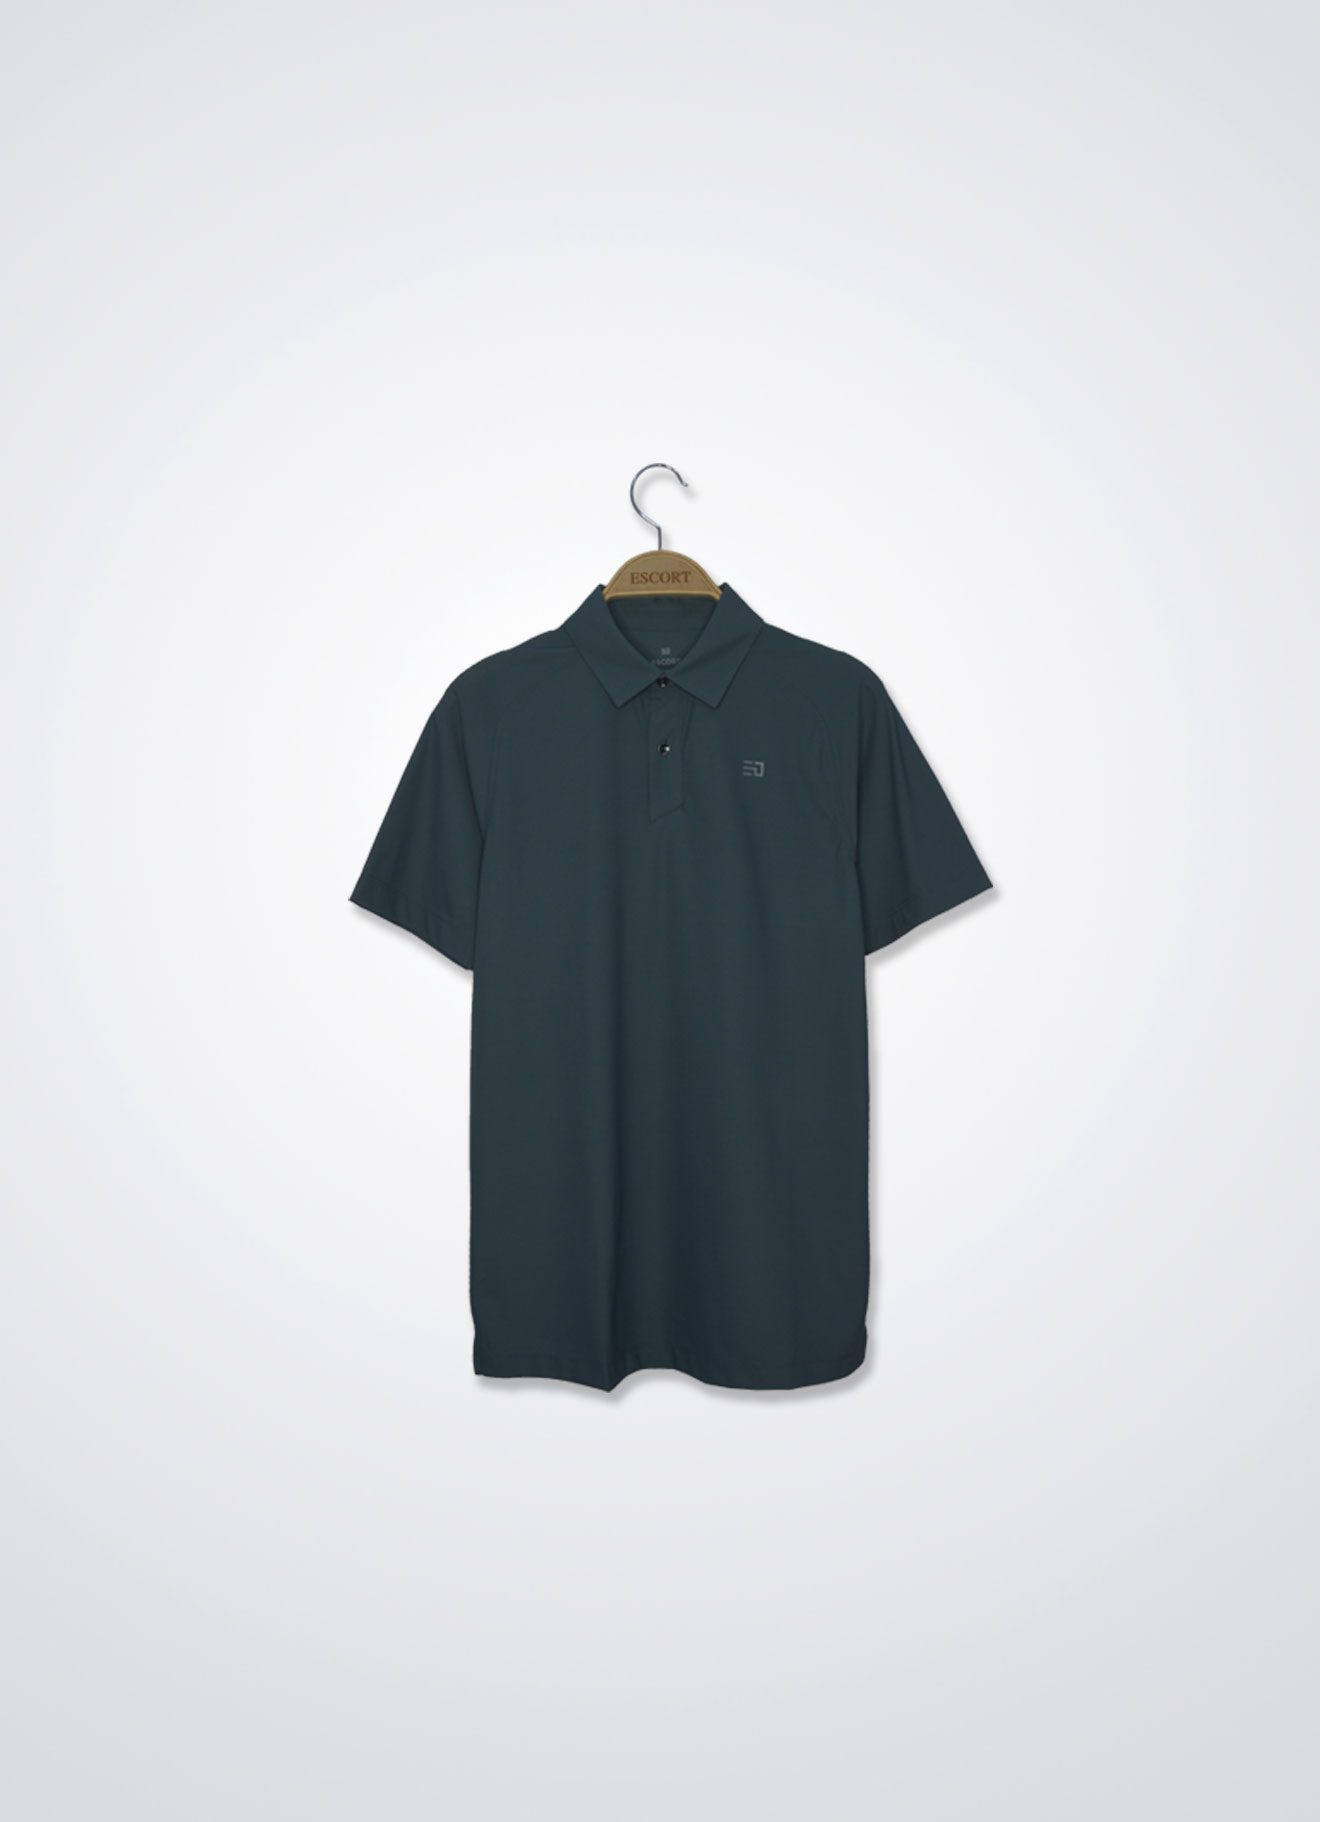 Balsam-Green by Polo Shirt